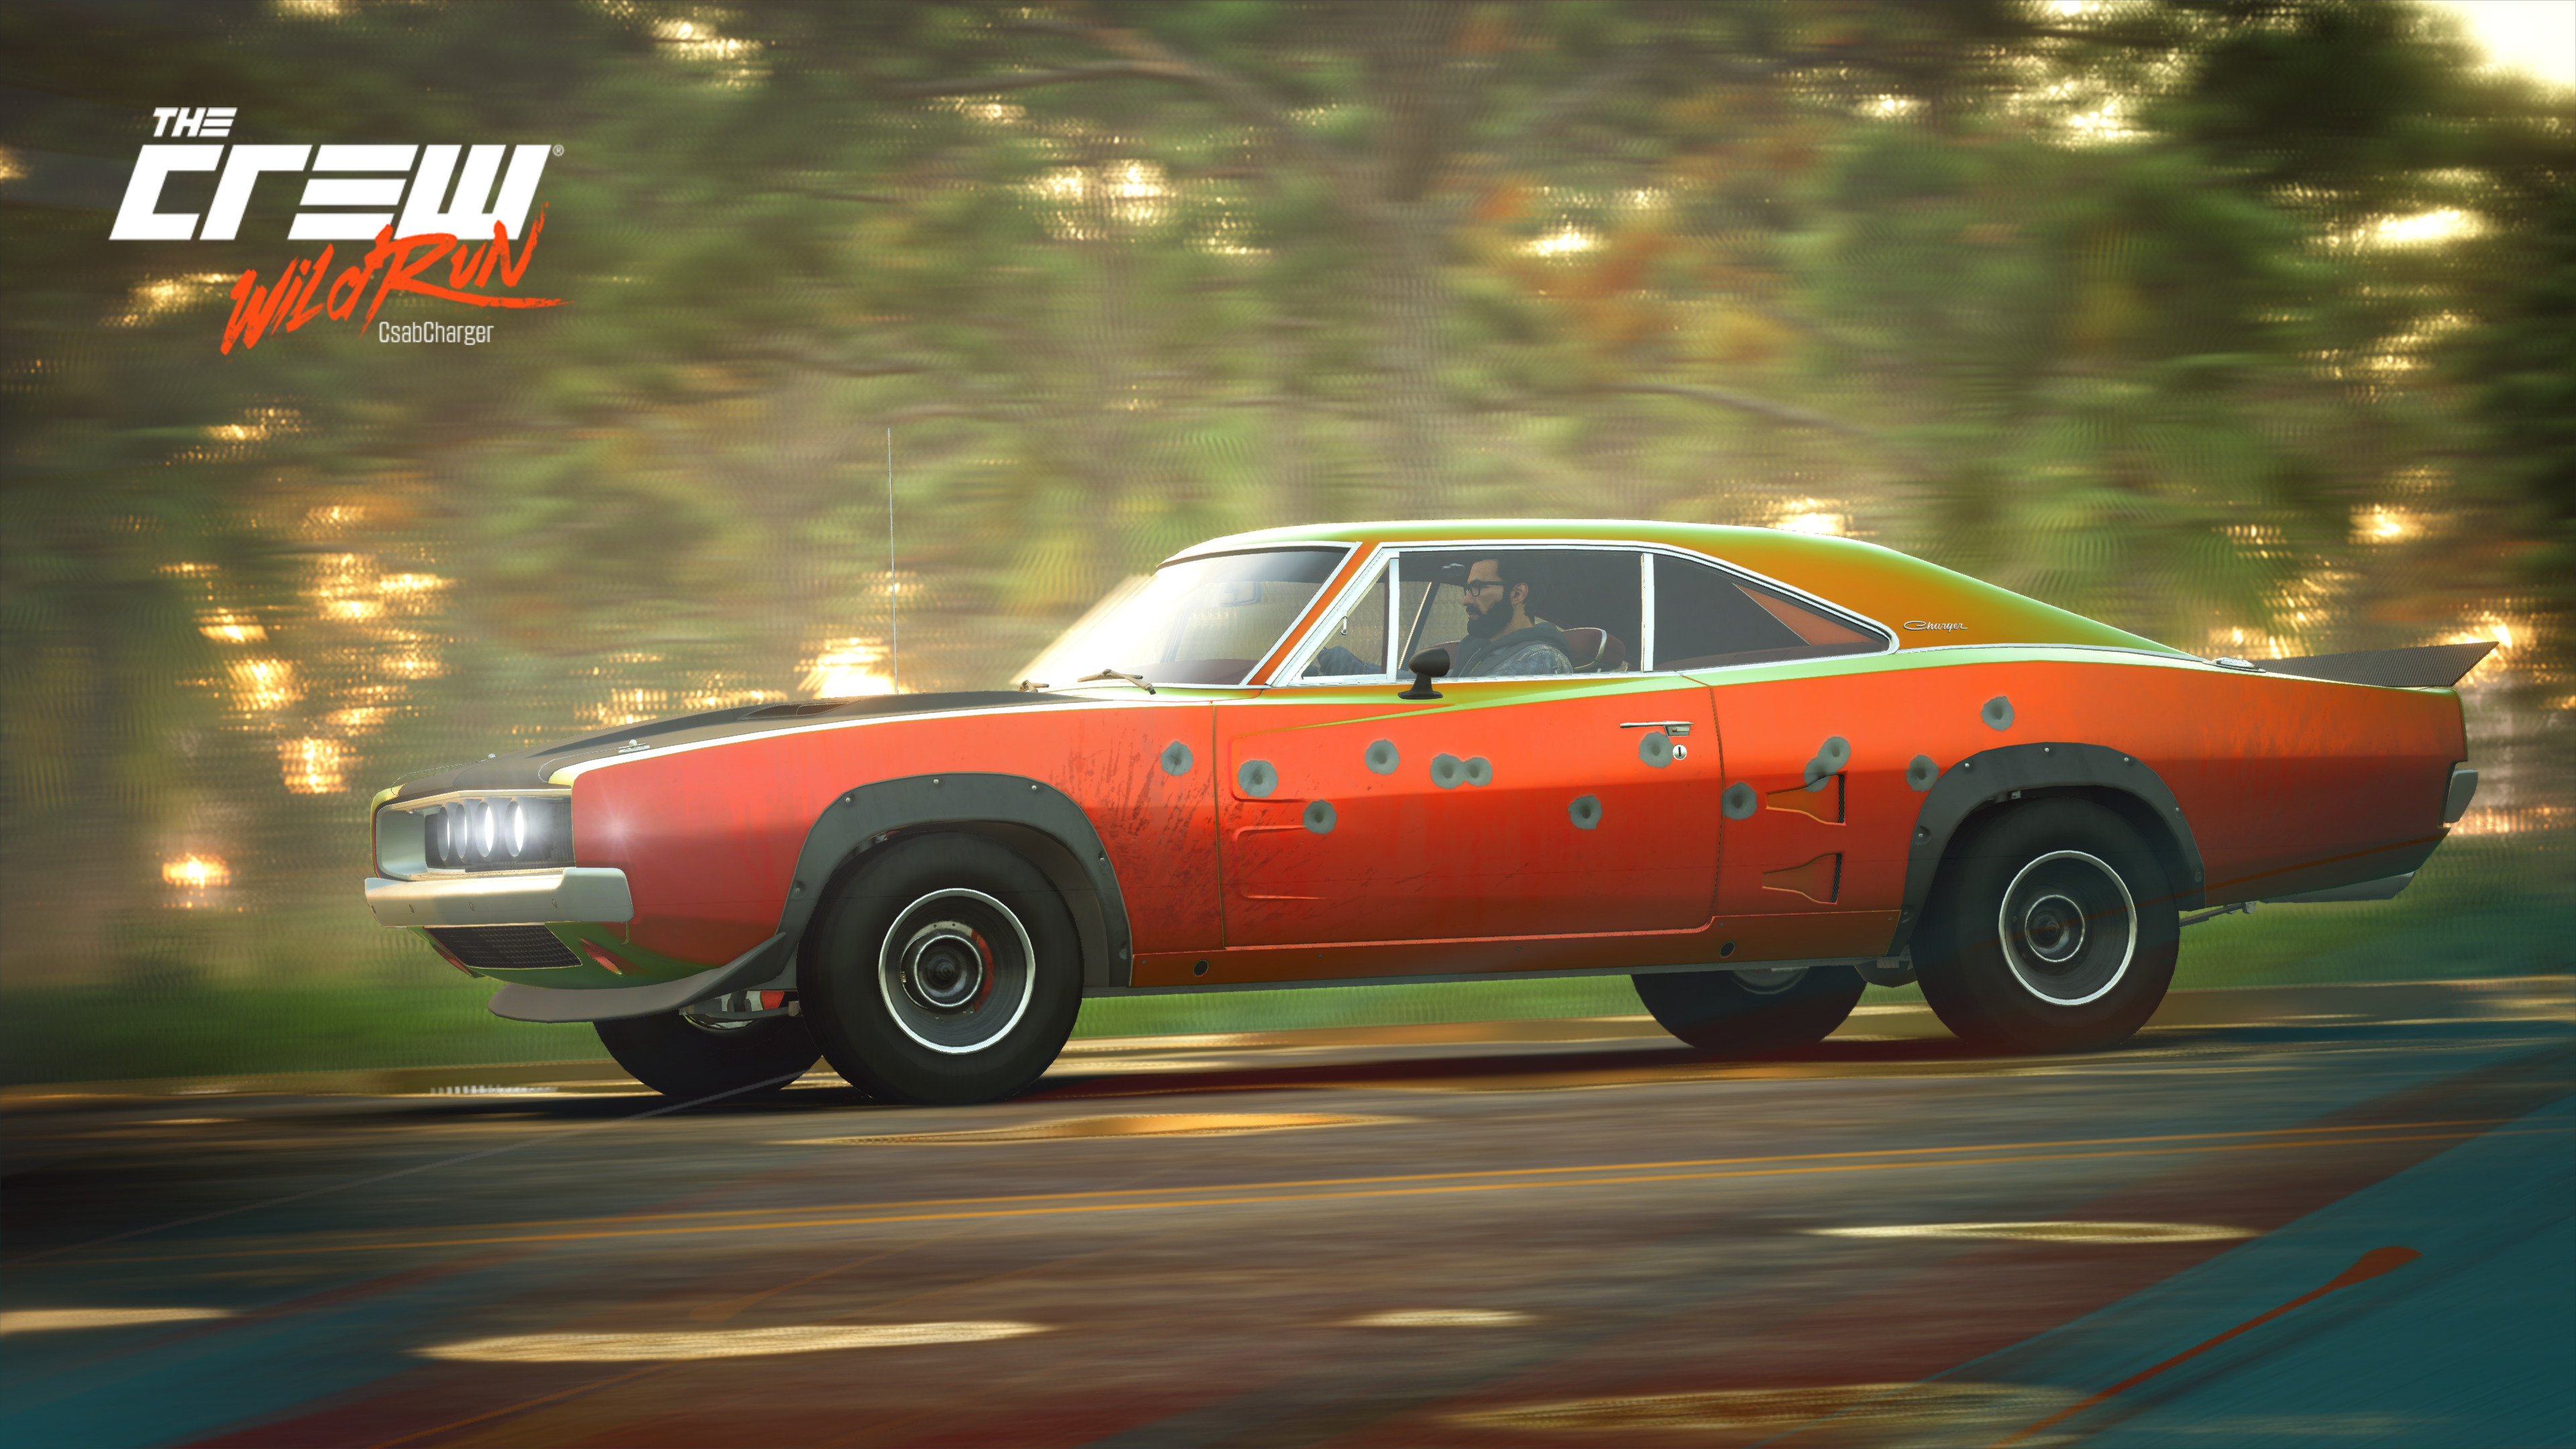 The Crew, Dodge, Dodge Charger, Muscle cars, Dirt road, The Crew Wild Run Wallpaper